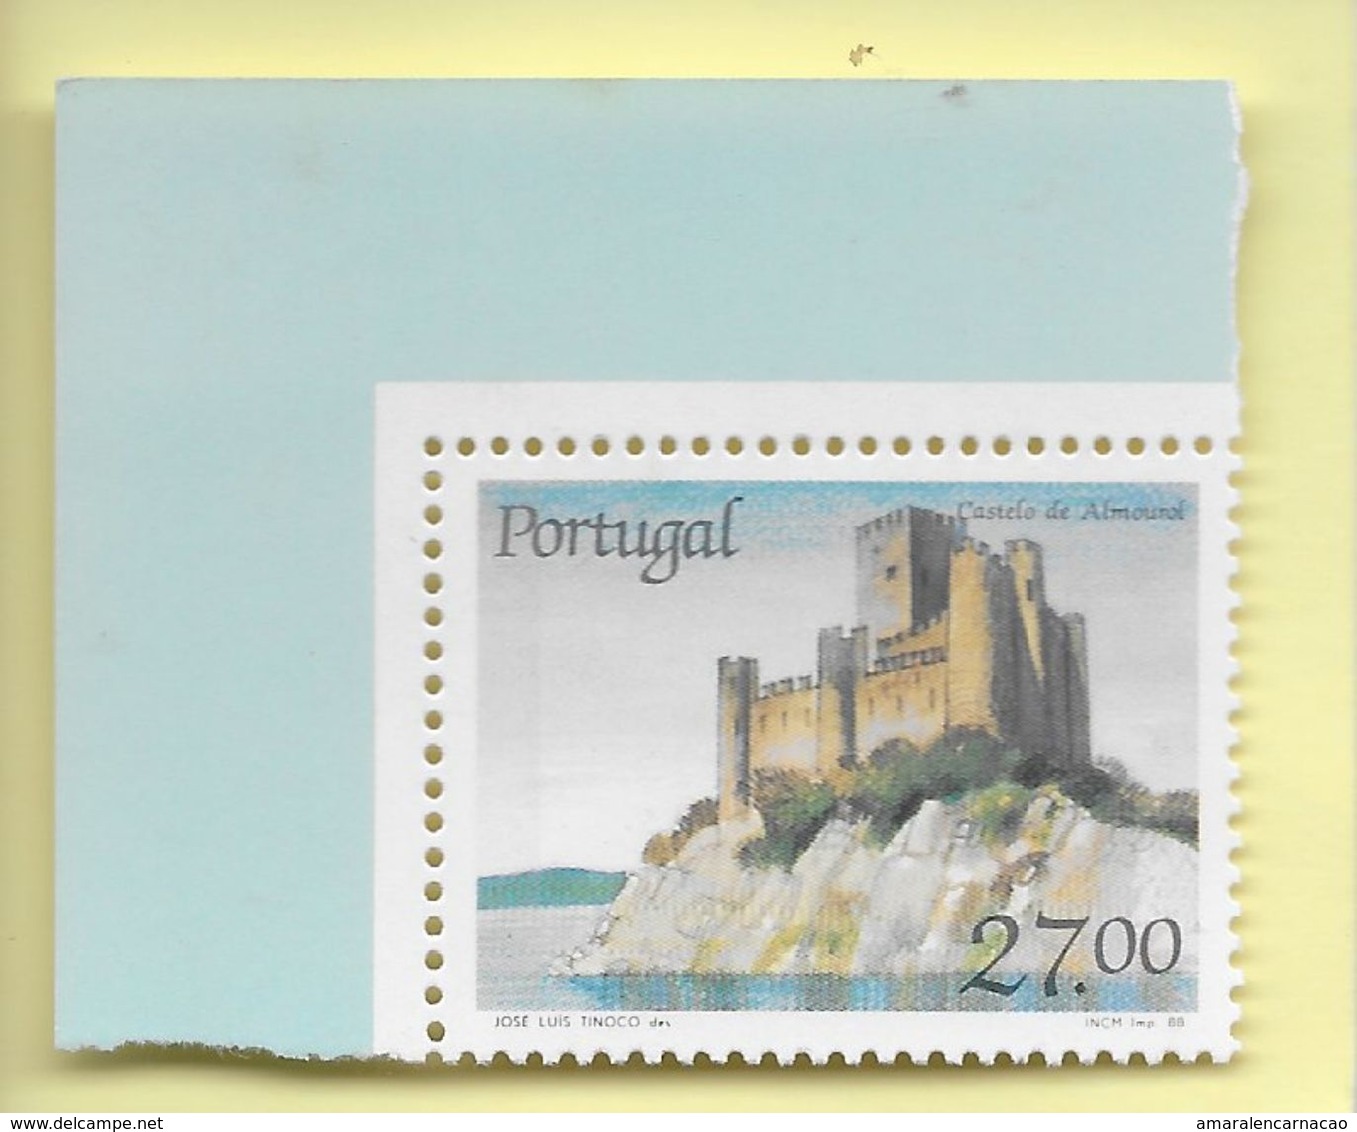 TIMBRES - STAMPS - PORTUGAL - 1988 - LE CHATEAU DE ALMOUROL  - TIMBRE  NEUF - MNH - Unused Stamps